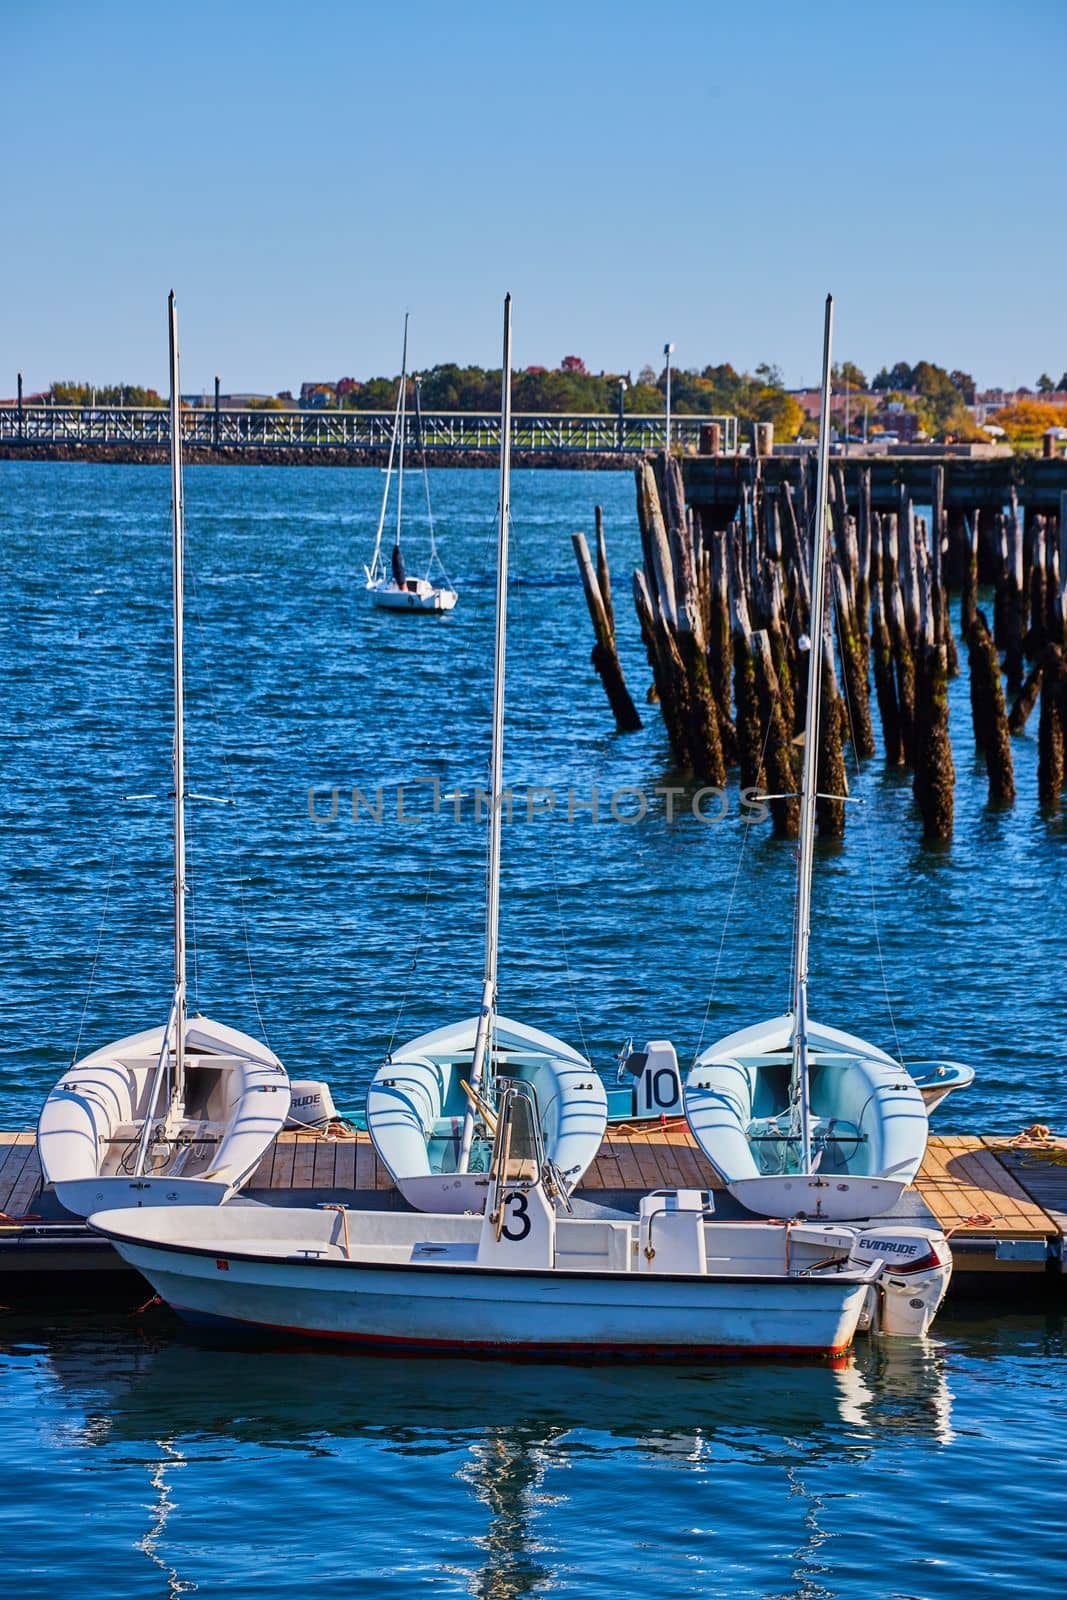 Image of Trio of small white boats on dock with old pilings in background